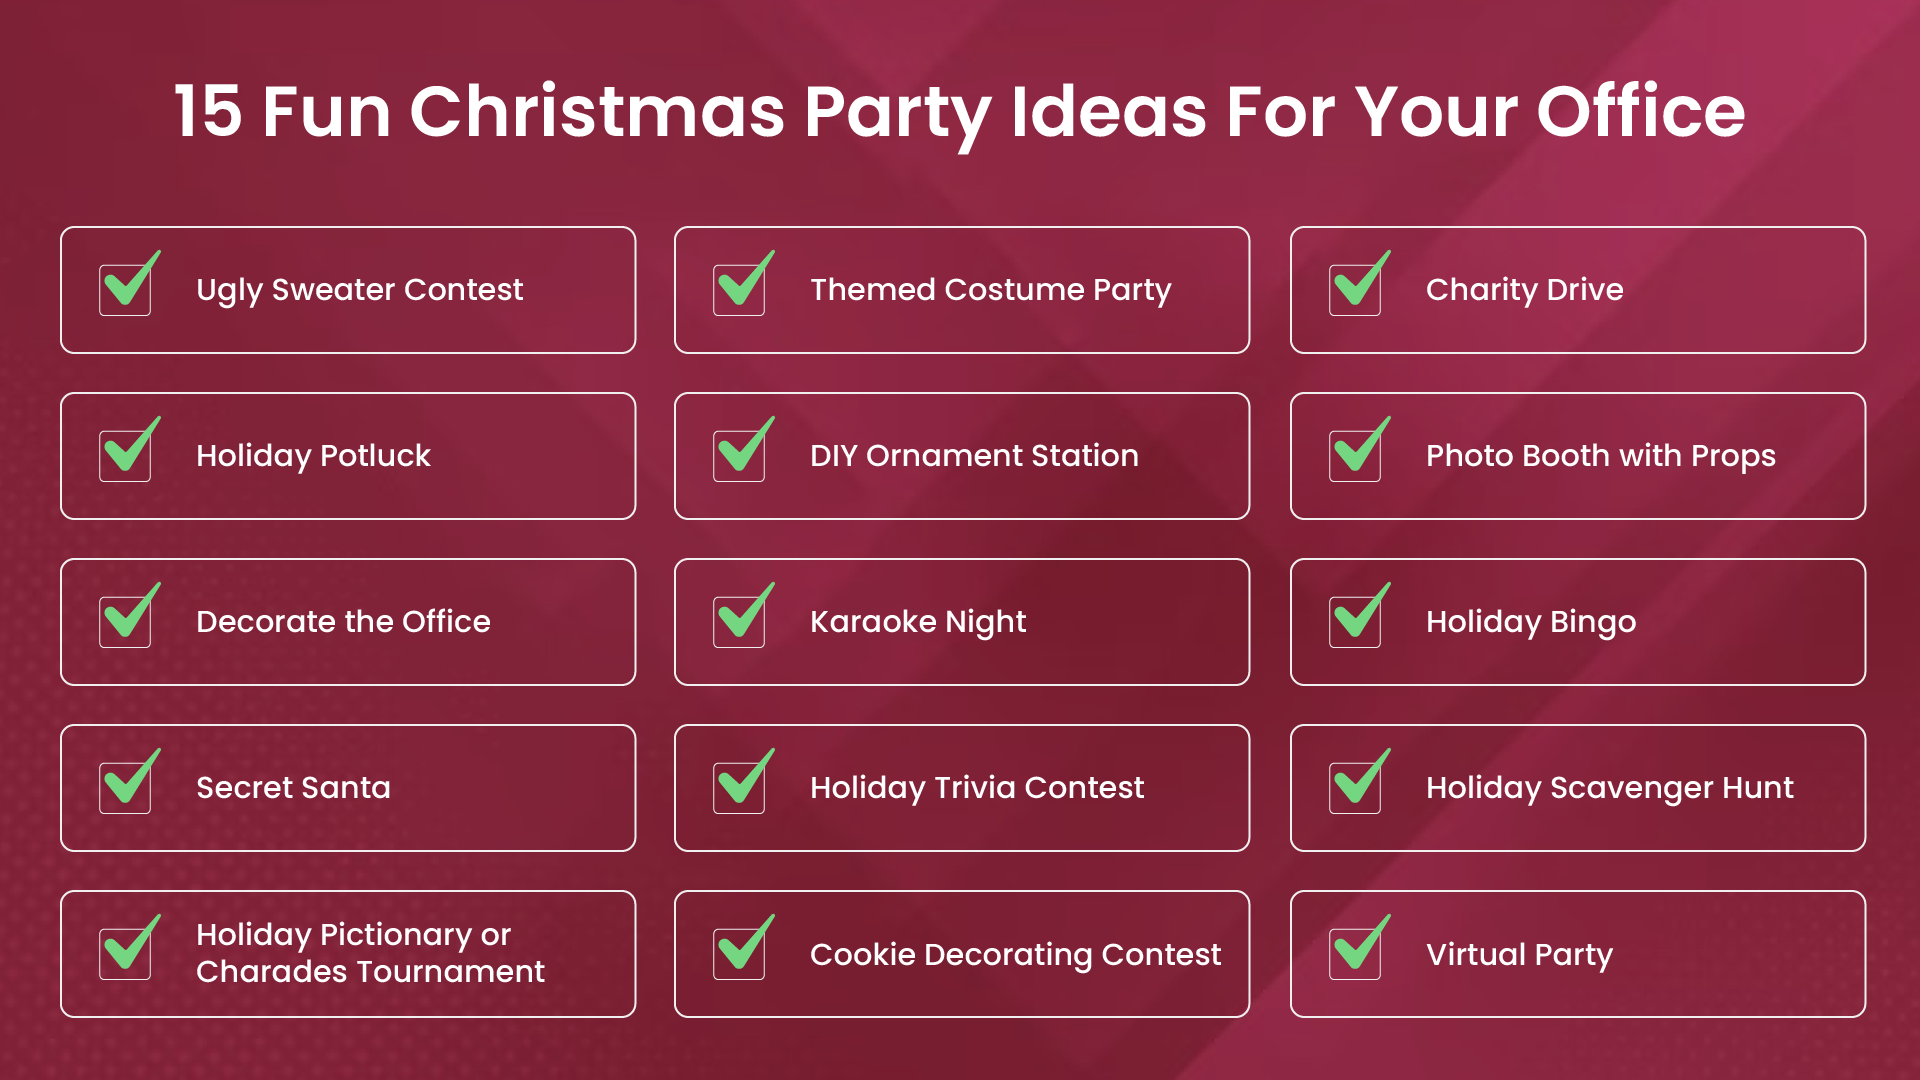 15 fun Christmas party ideas for your office